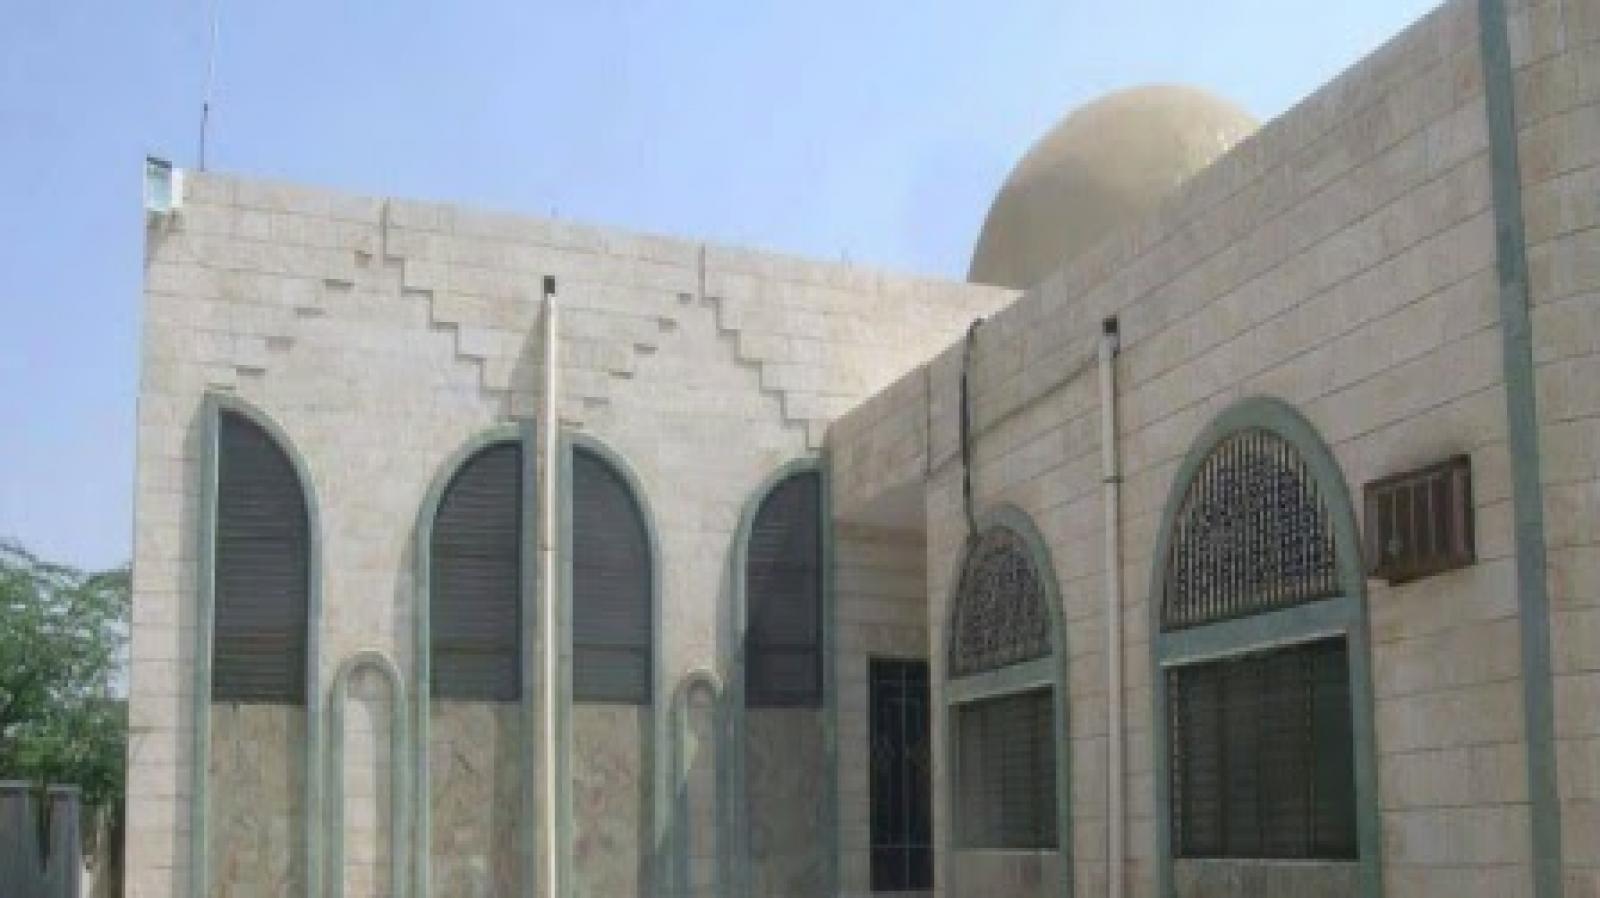 Zinjibar museum before it was stormed and looted by al-Qaeda in 2011, Archives of Deputy Director of Aden Antiquities Authority, 10 September 2019